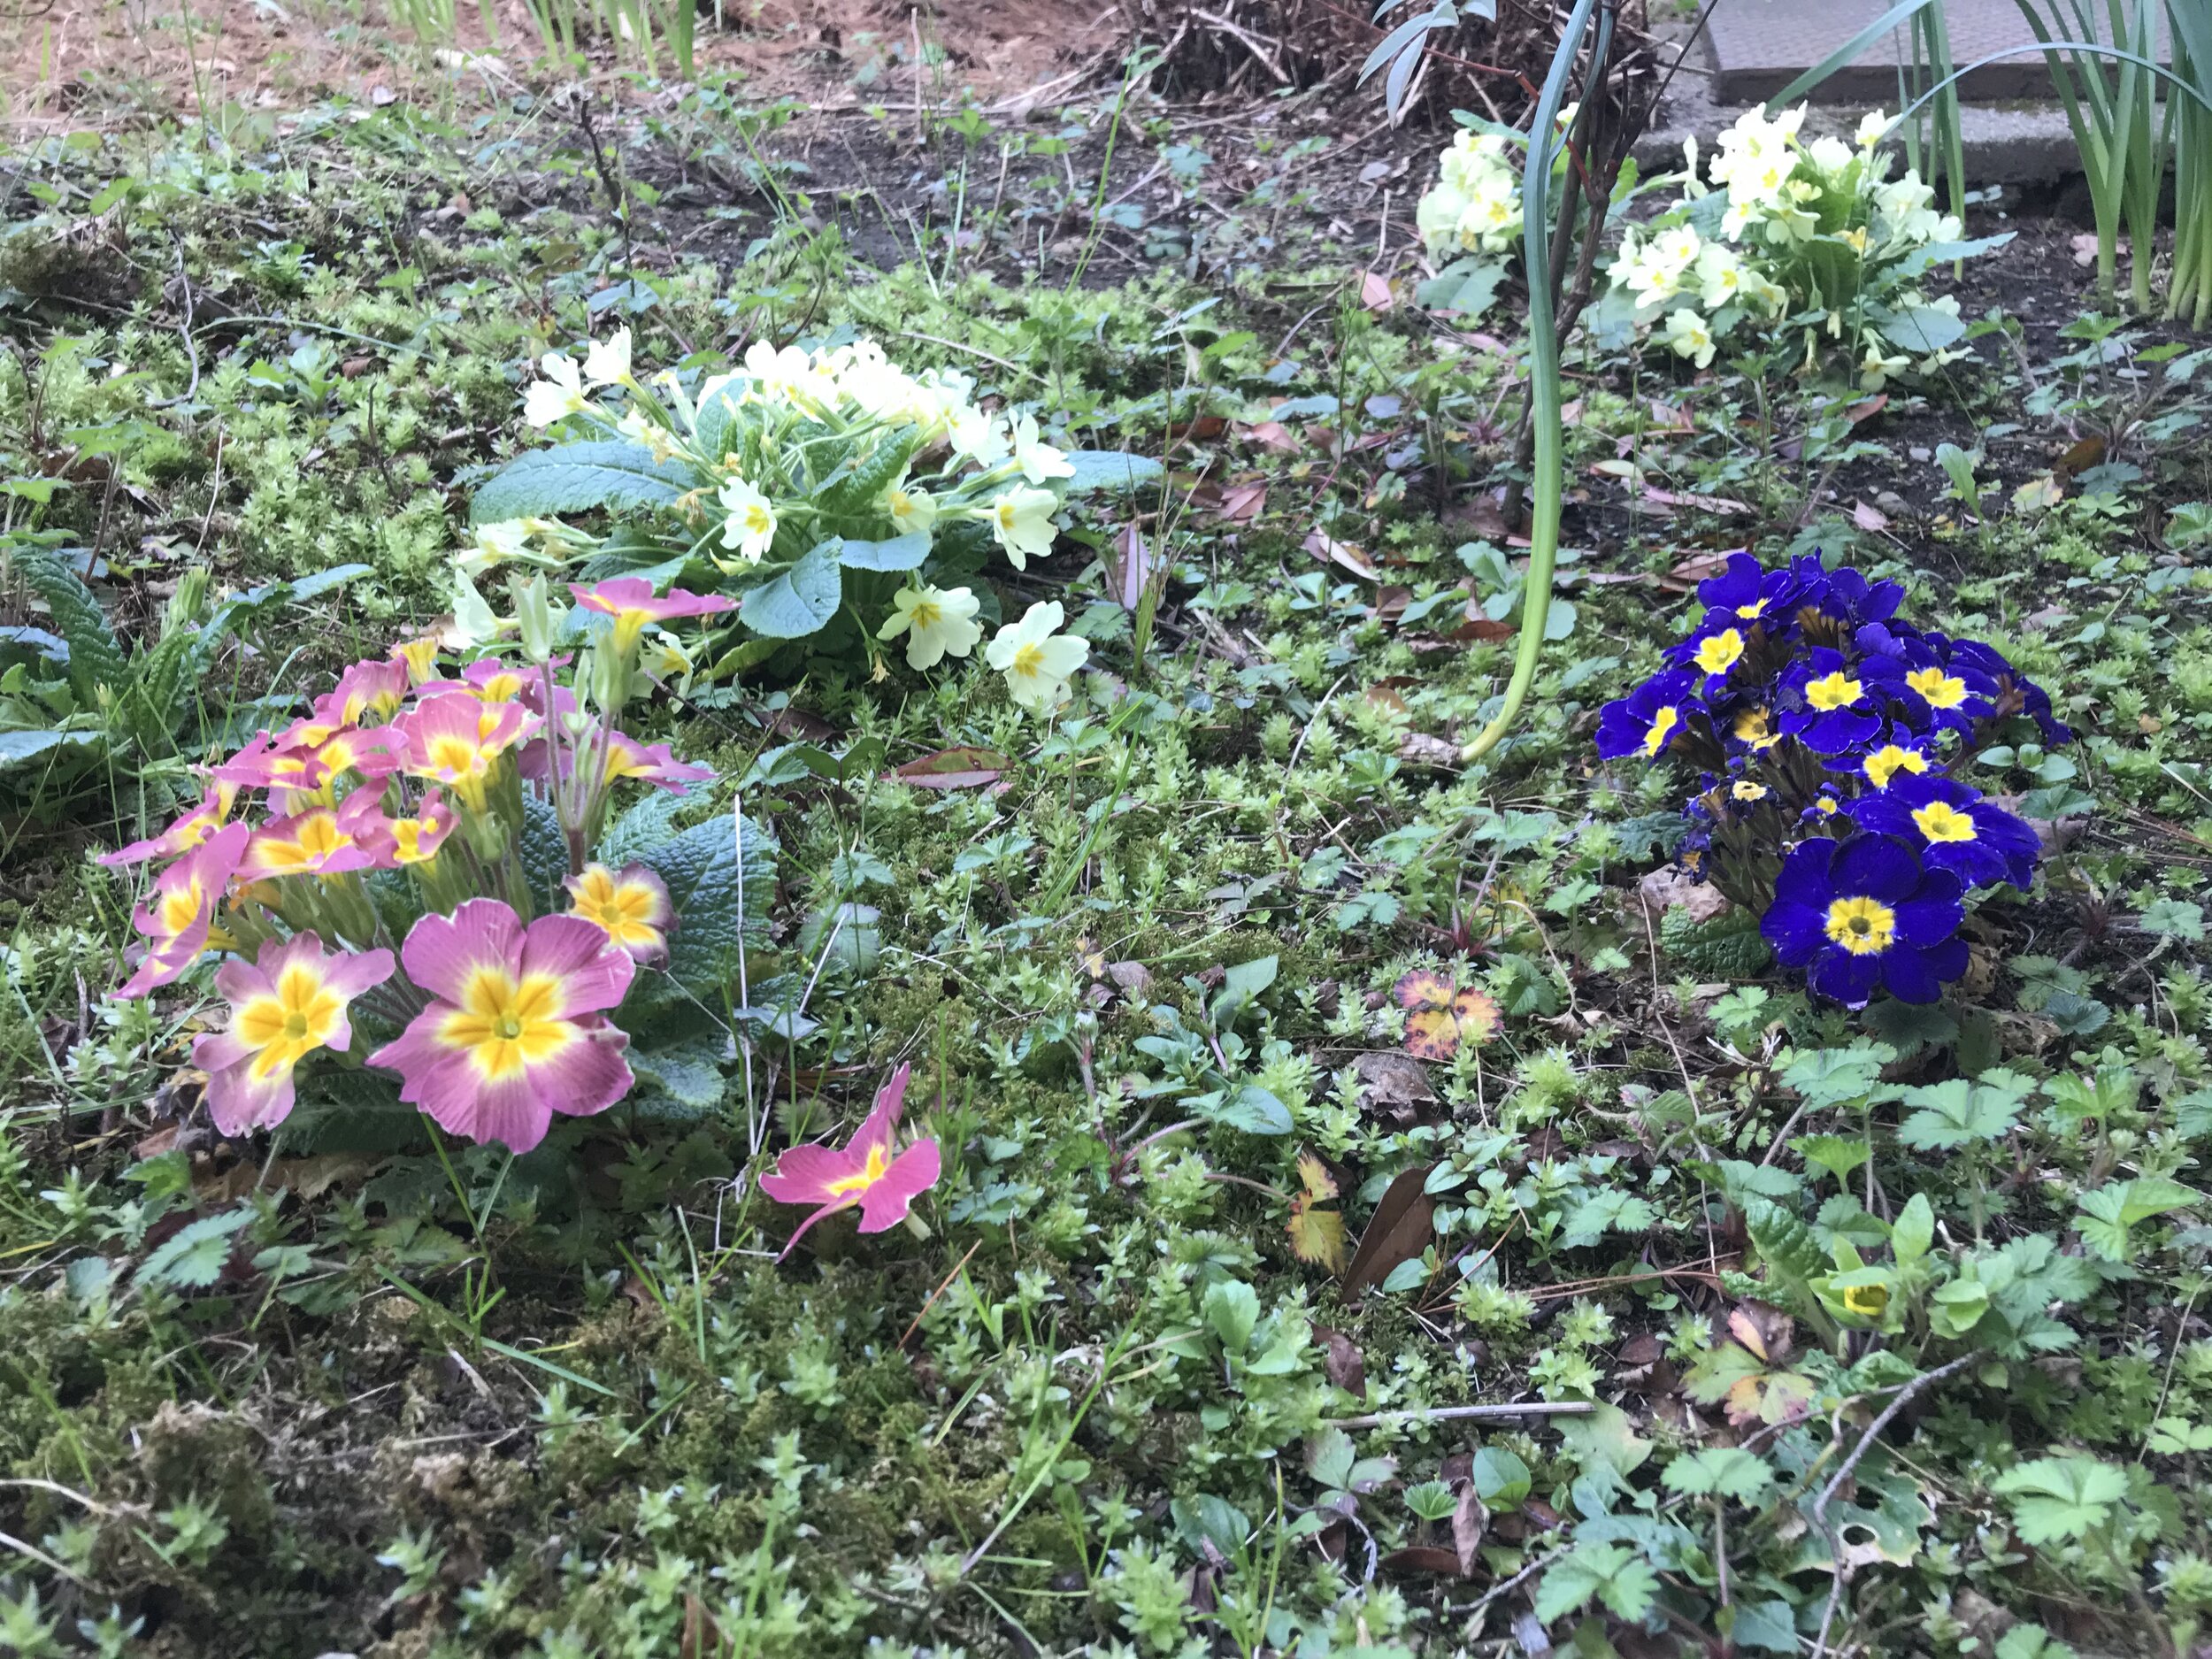   PICTURED:   Nonna Carla  was the first person to ever tell me that flowers grown in the shade will have different colors than flowers grown in the sun. 